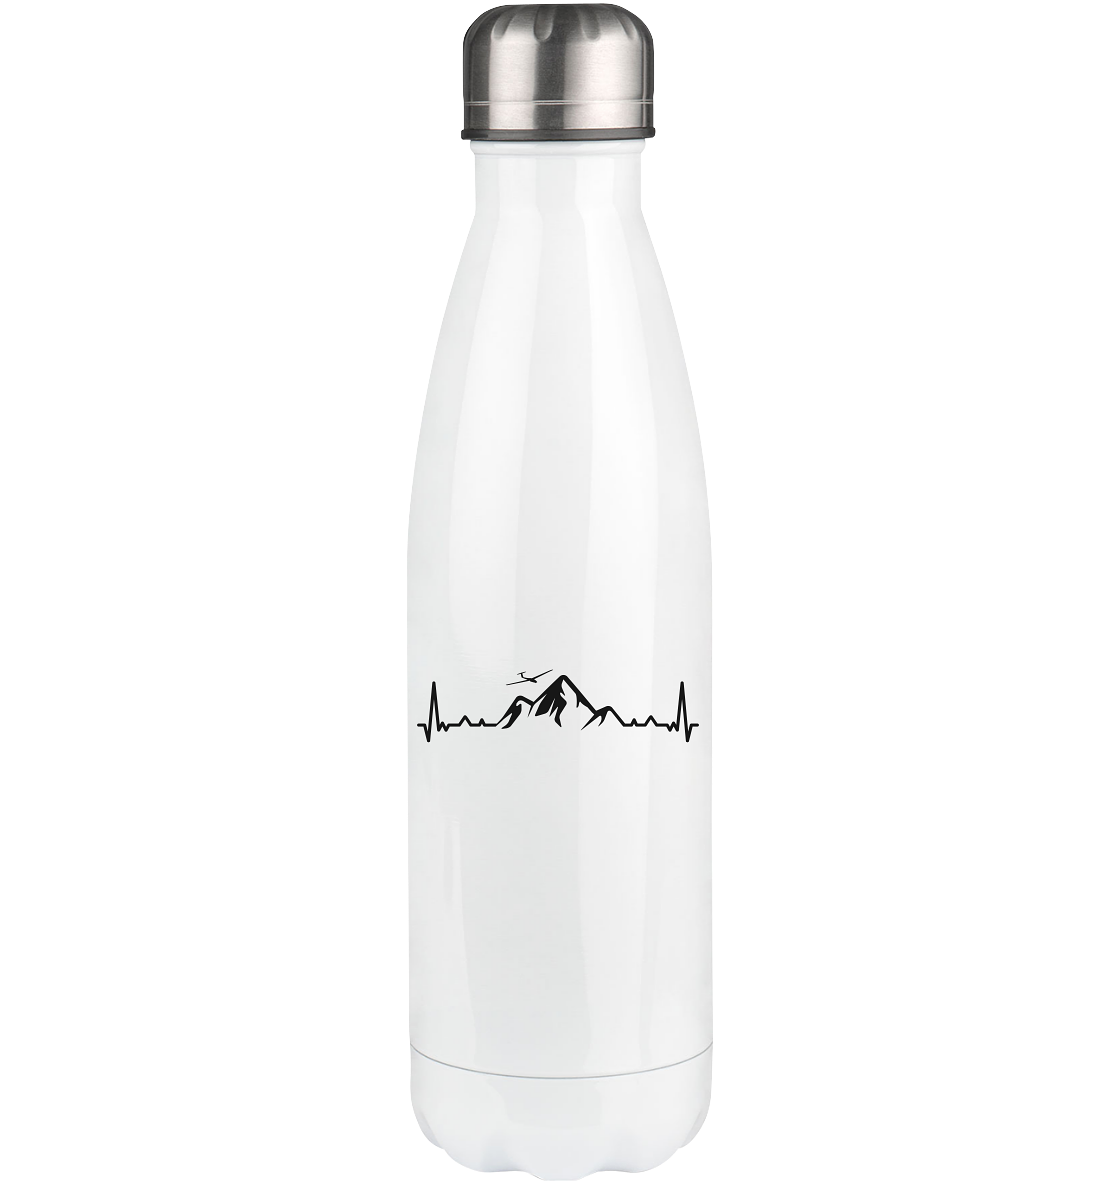 Heartbeat Mountain and Sailplane - Edelstahl Thermosflasche berge 500ml